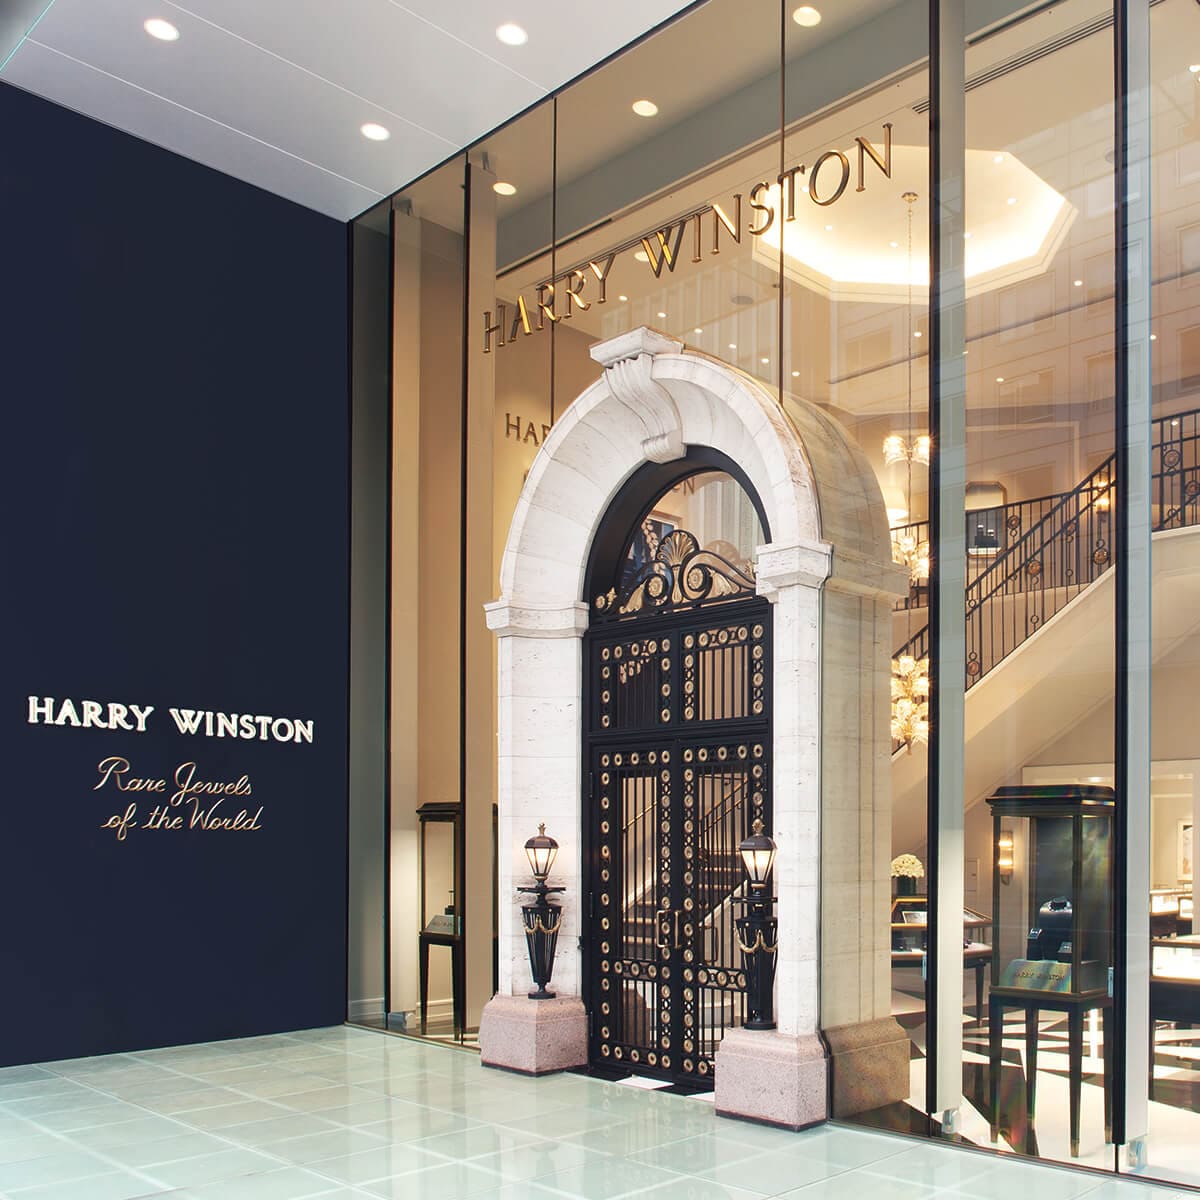 Entrance of the Harry Winston Salon in Ginza